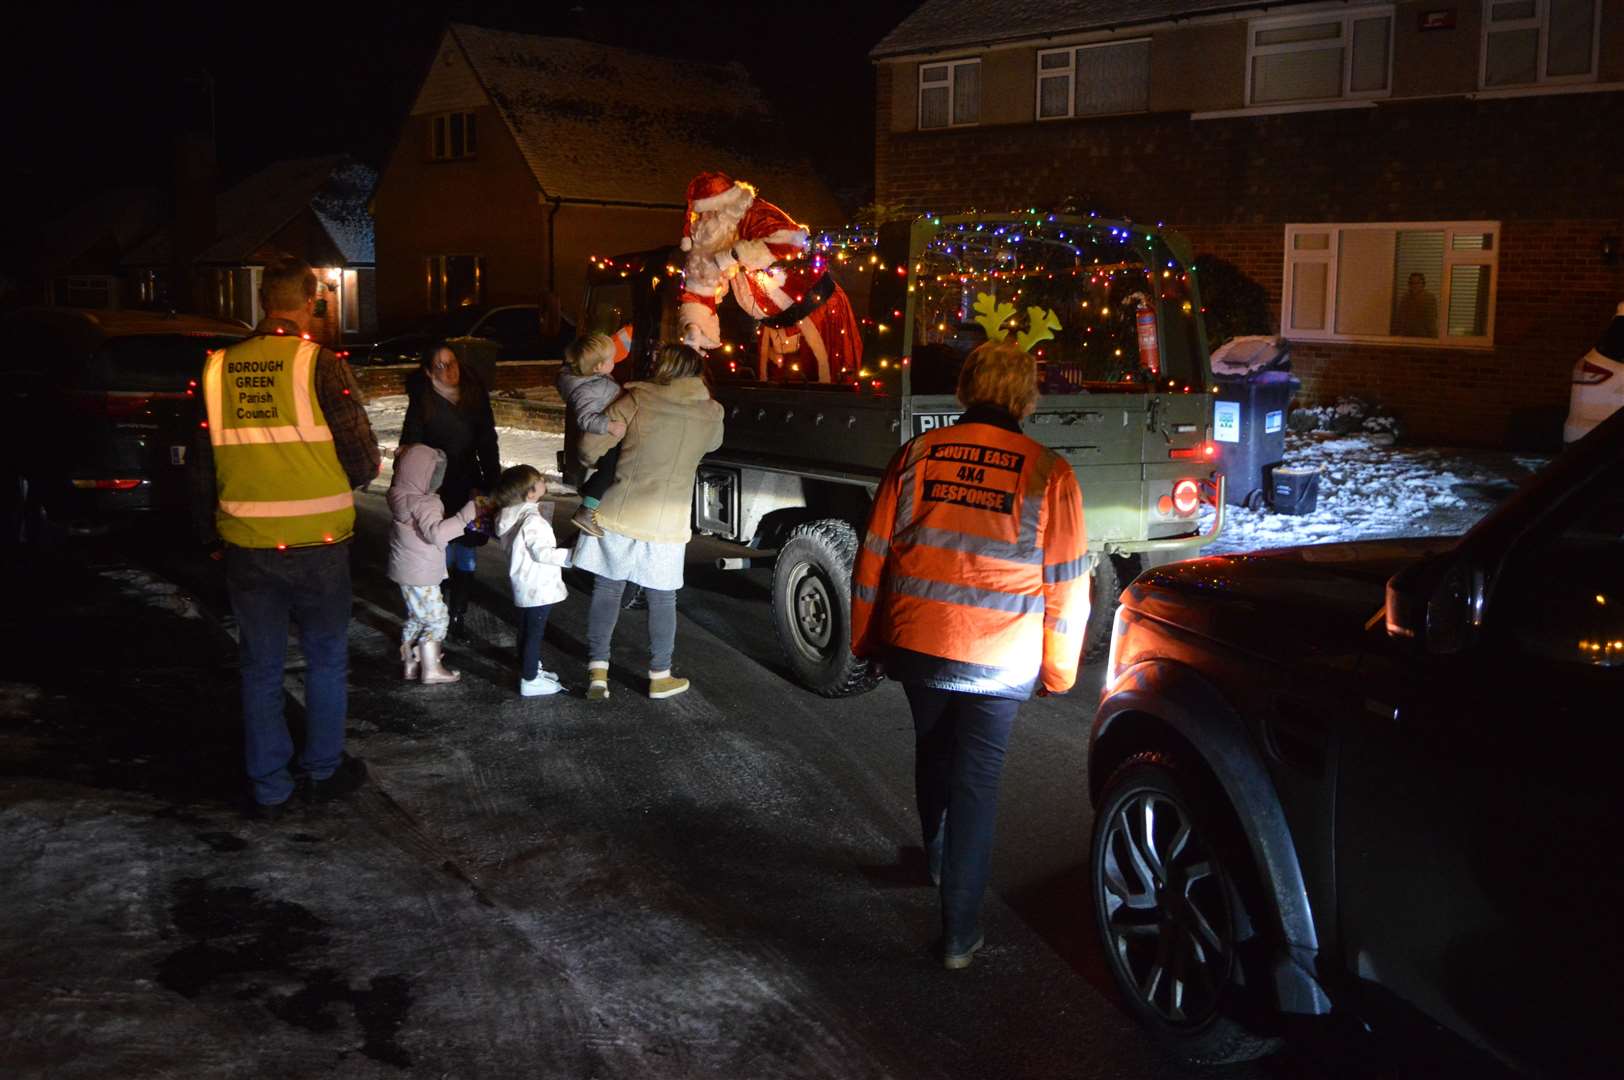 Santa gave out 300 boxes of chocolate to local children. Picture: SE4x4R